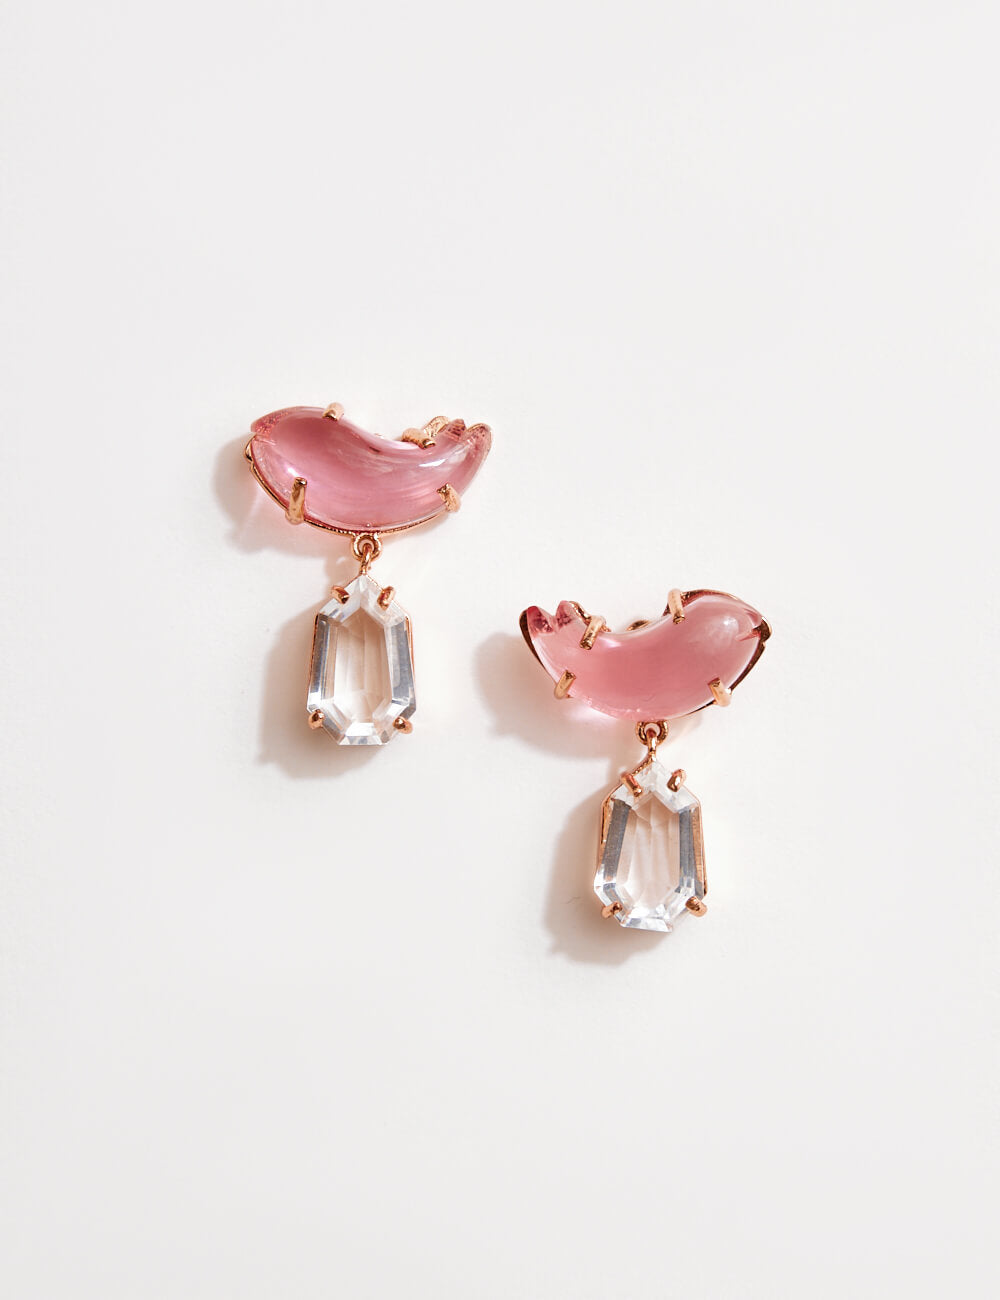 Blush Pink Leather Earrings | Mod Miss Jewelry